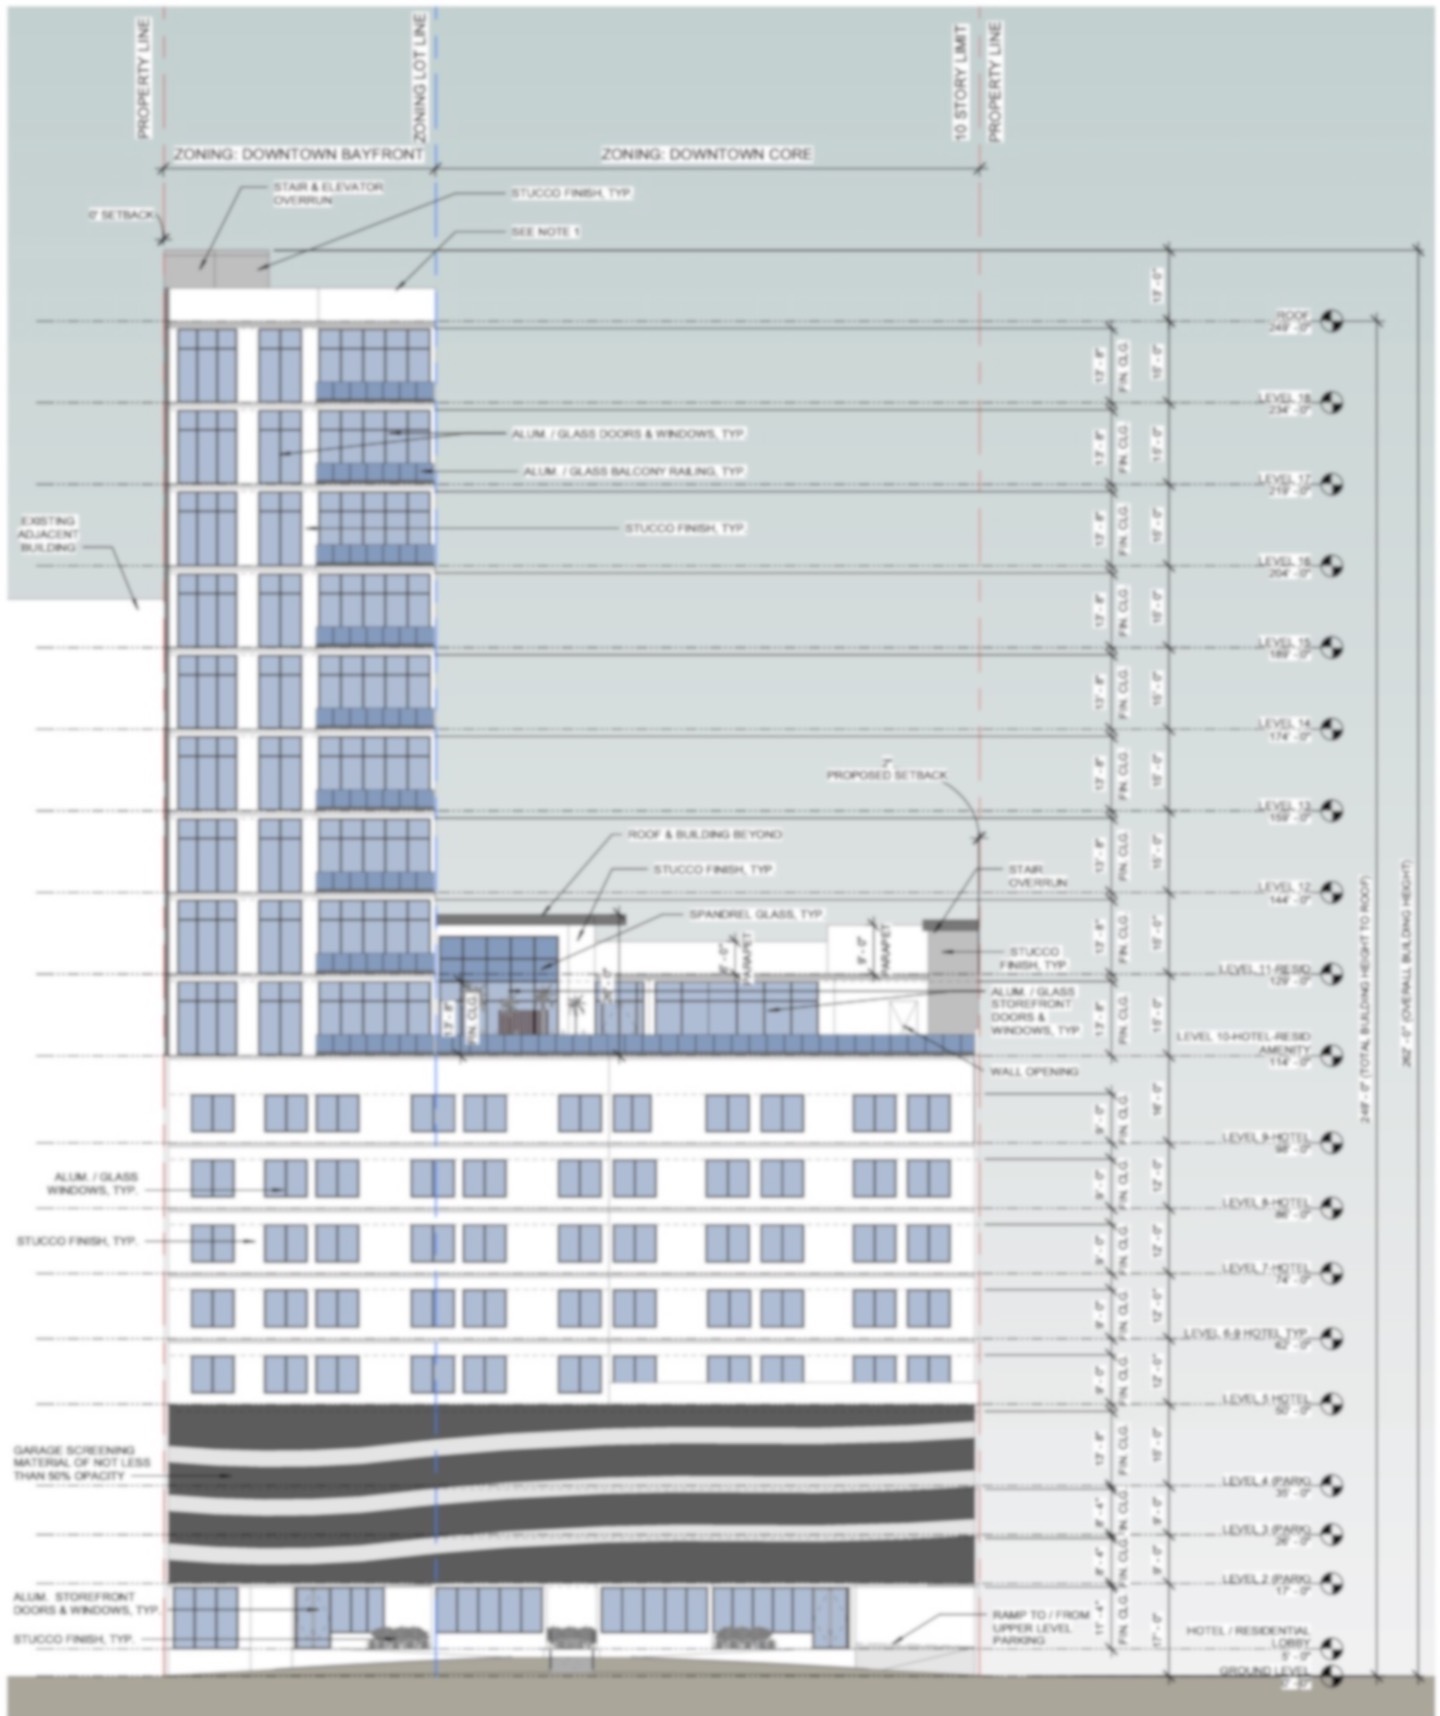 The design by Hoyt Architects for 1225 Second Street shows nine floors of condominiums above 10 stories of hotel and parking structure. The condo tower is immediately adjacent to the Embassy Suites hotel. (Courtesy image)